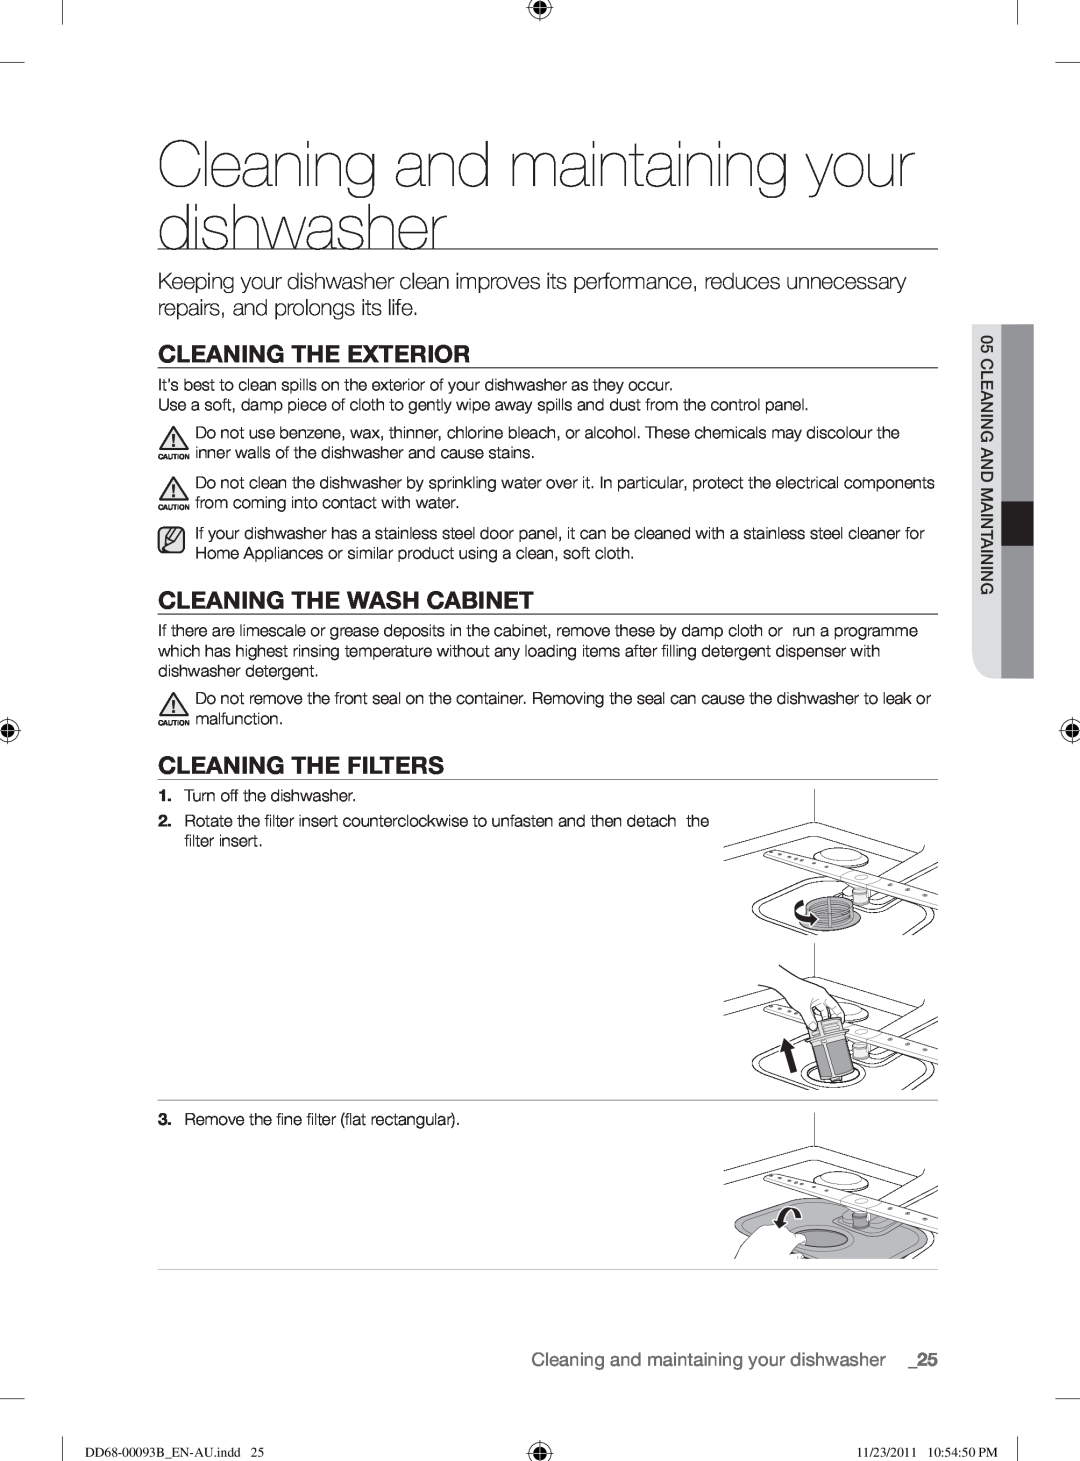 Samsung DW-FG520, DW-FG720 Cleaning and maintaining your dishwasher, Cleaning The Exterior, Cleaning The Wash Cabinet 